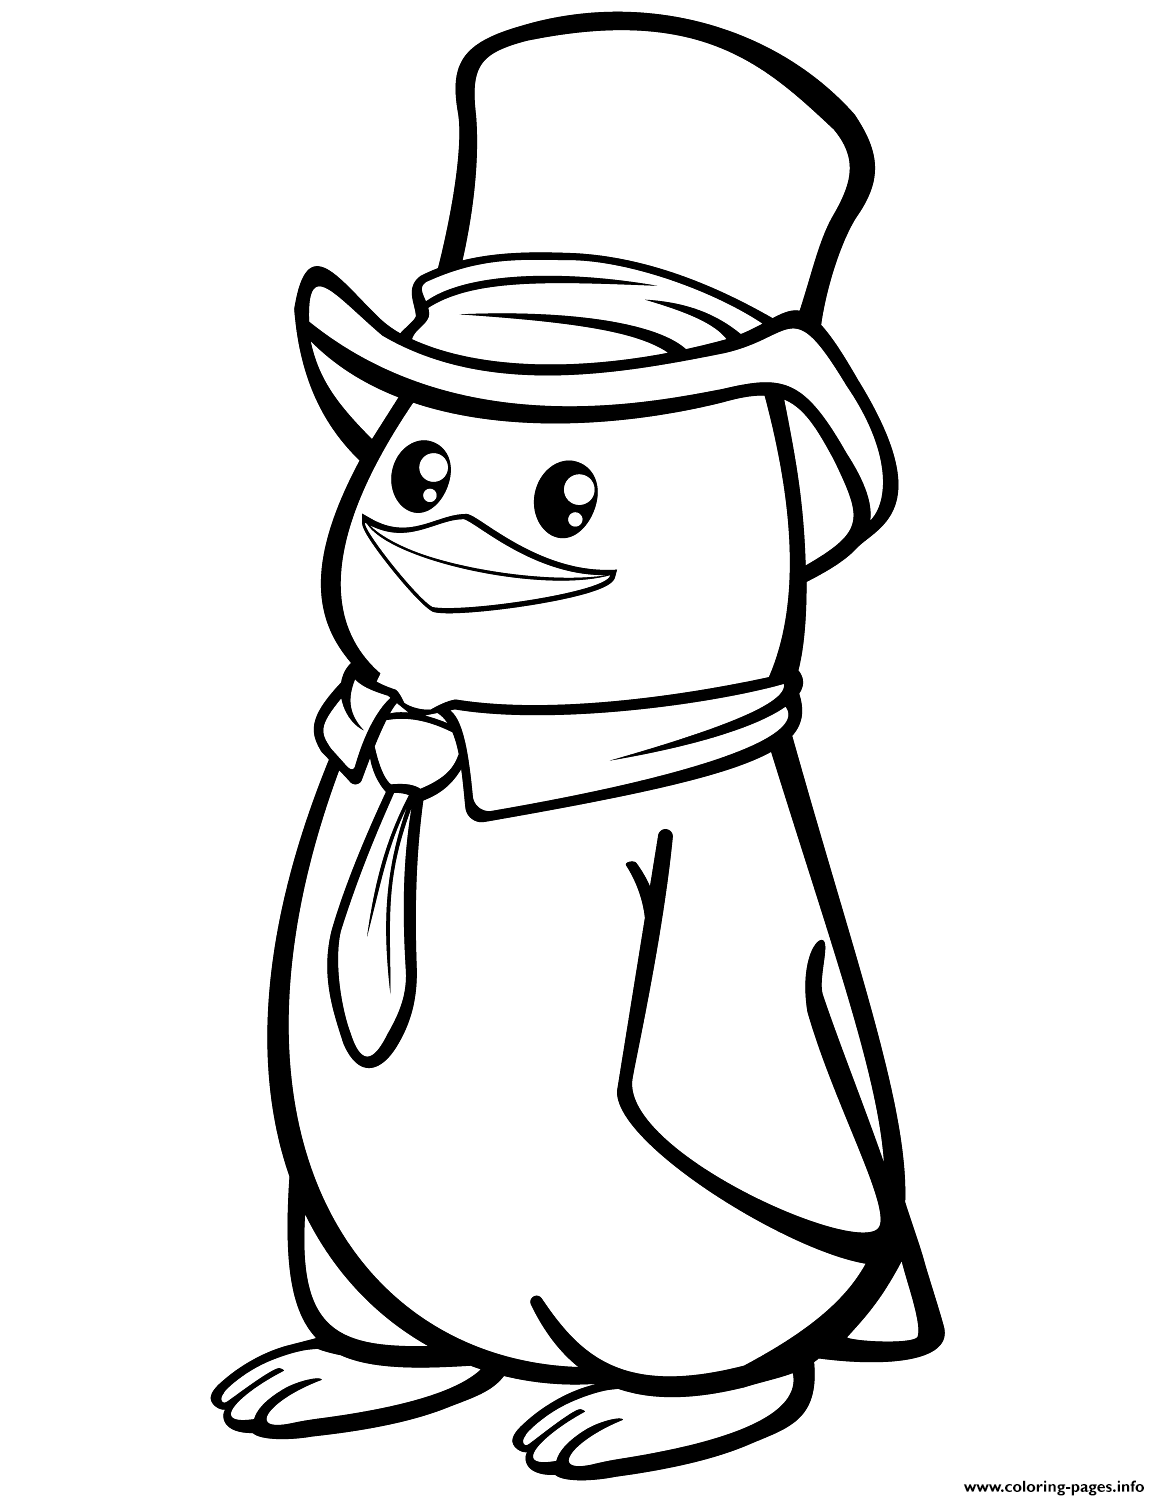 Polar Penguin With A Top Hat coloring